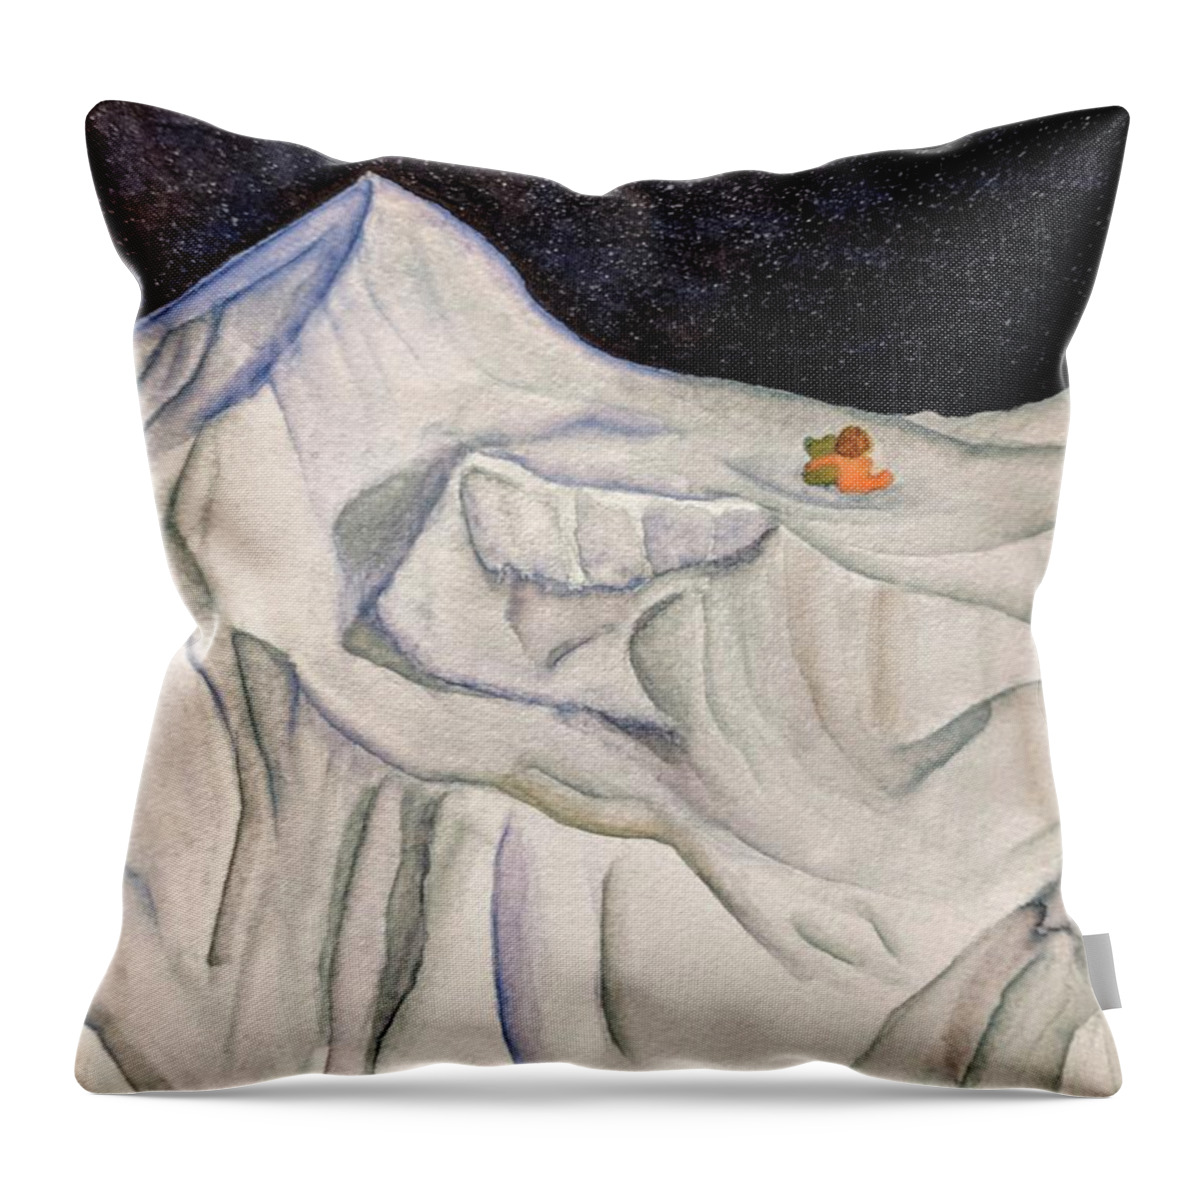 Mountains Throw Pillow featuring the painting Far From Home by Misty Morehead